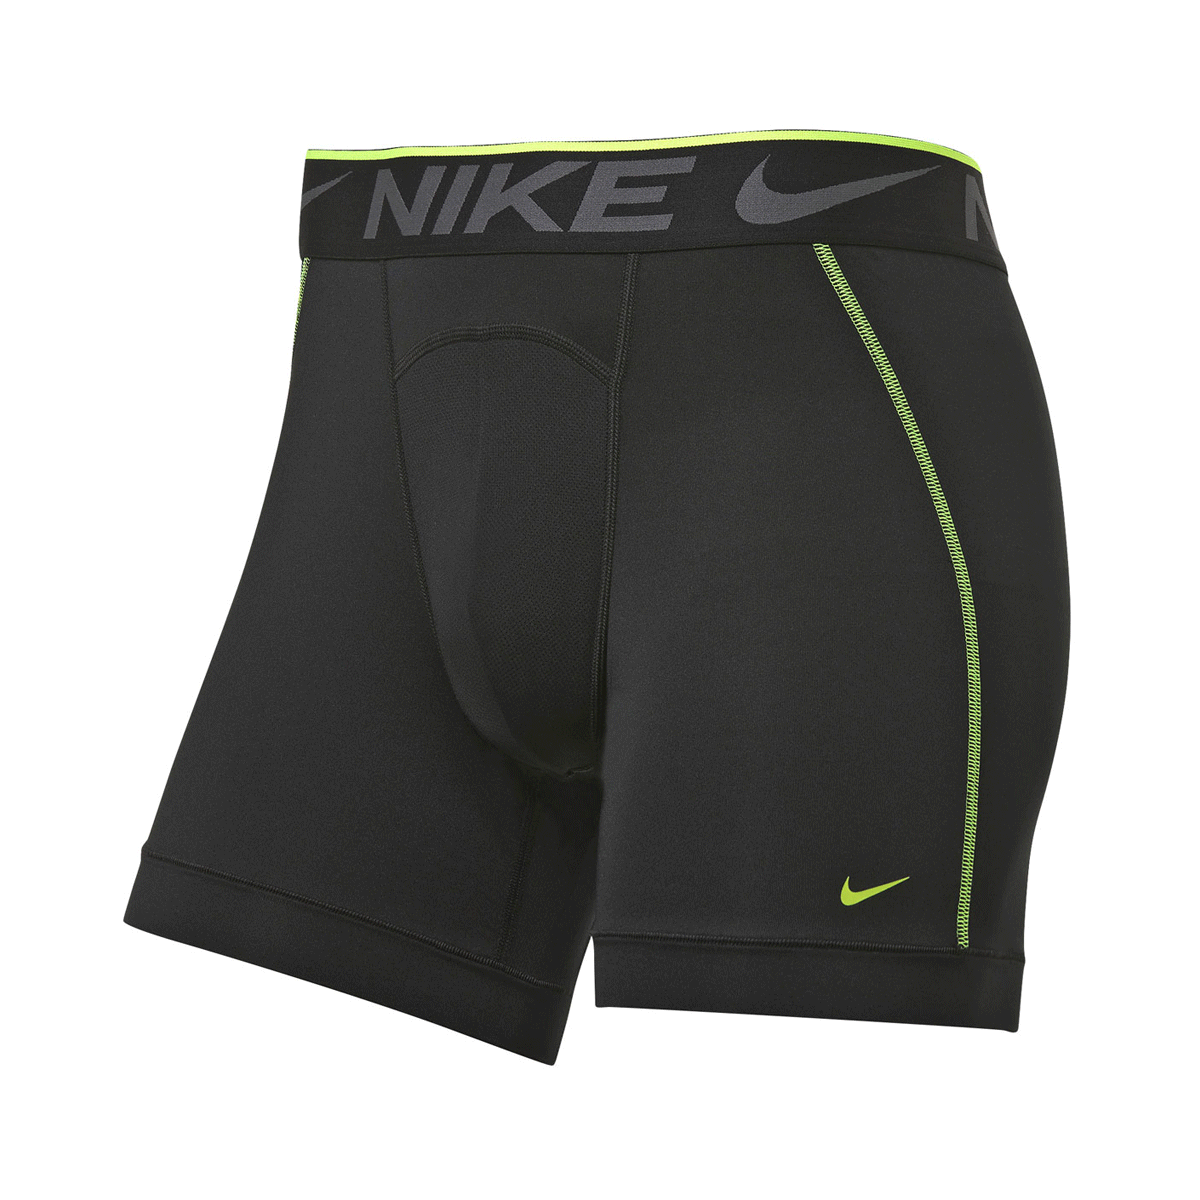 Rugby-Ball Underpants Boxershort Sport 117 